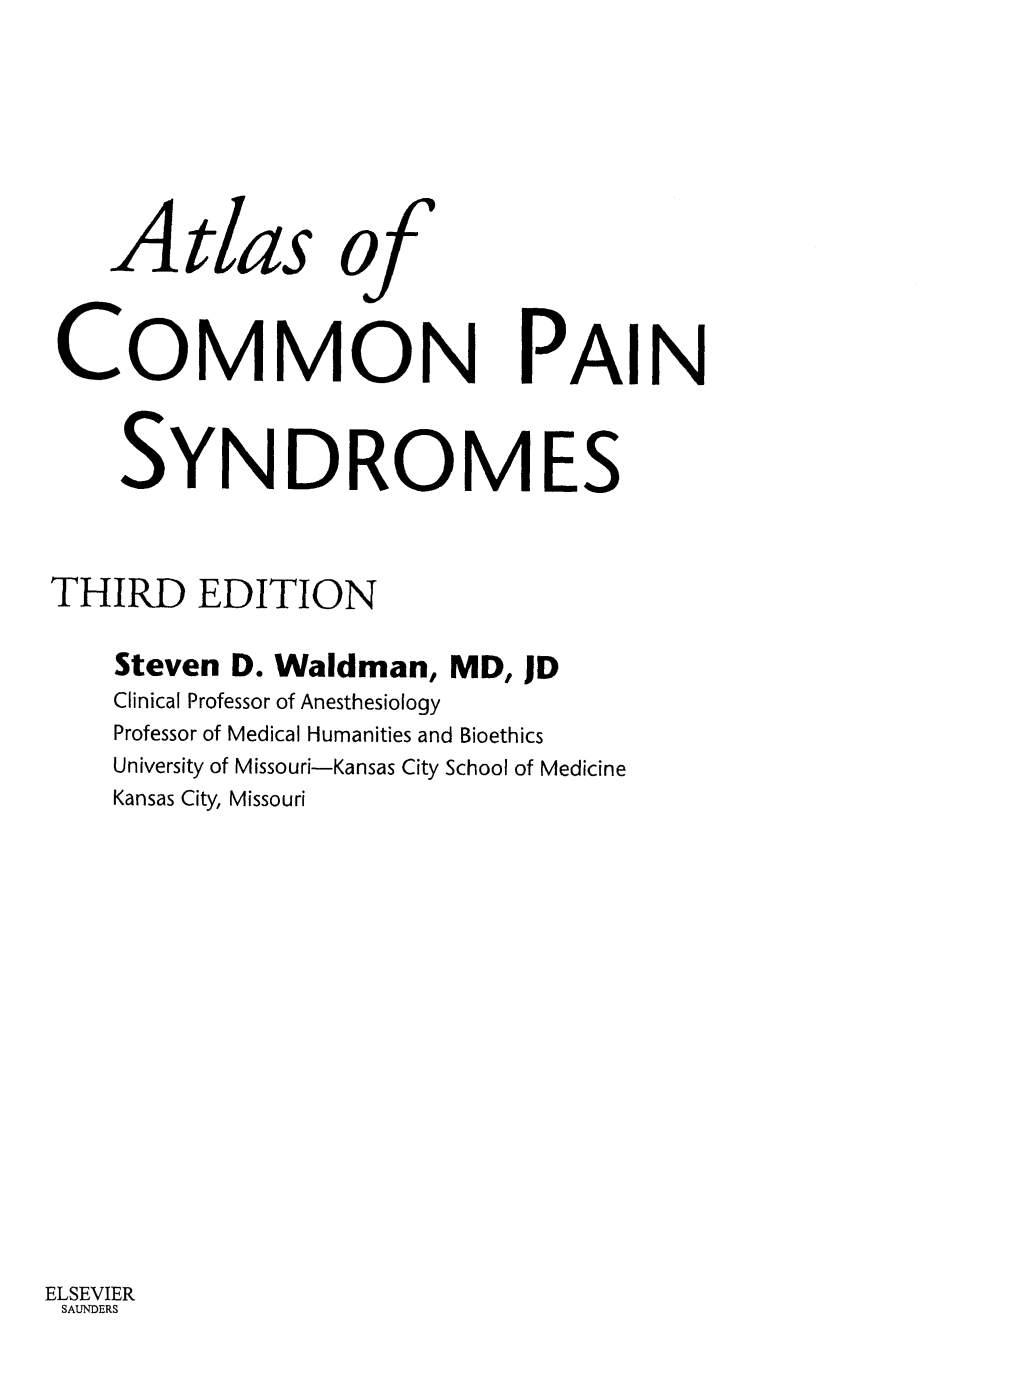 Common Pain Syndromes